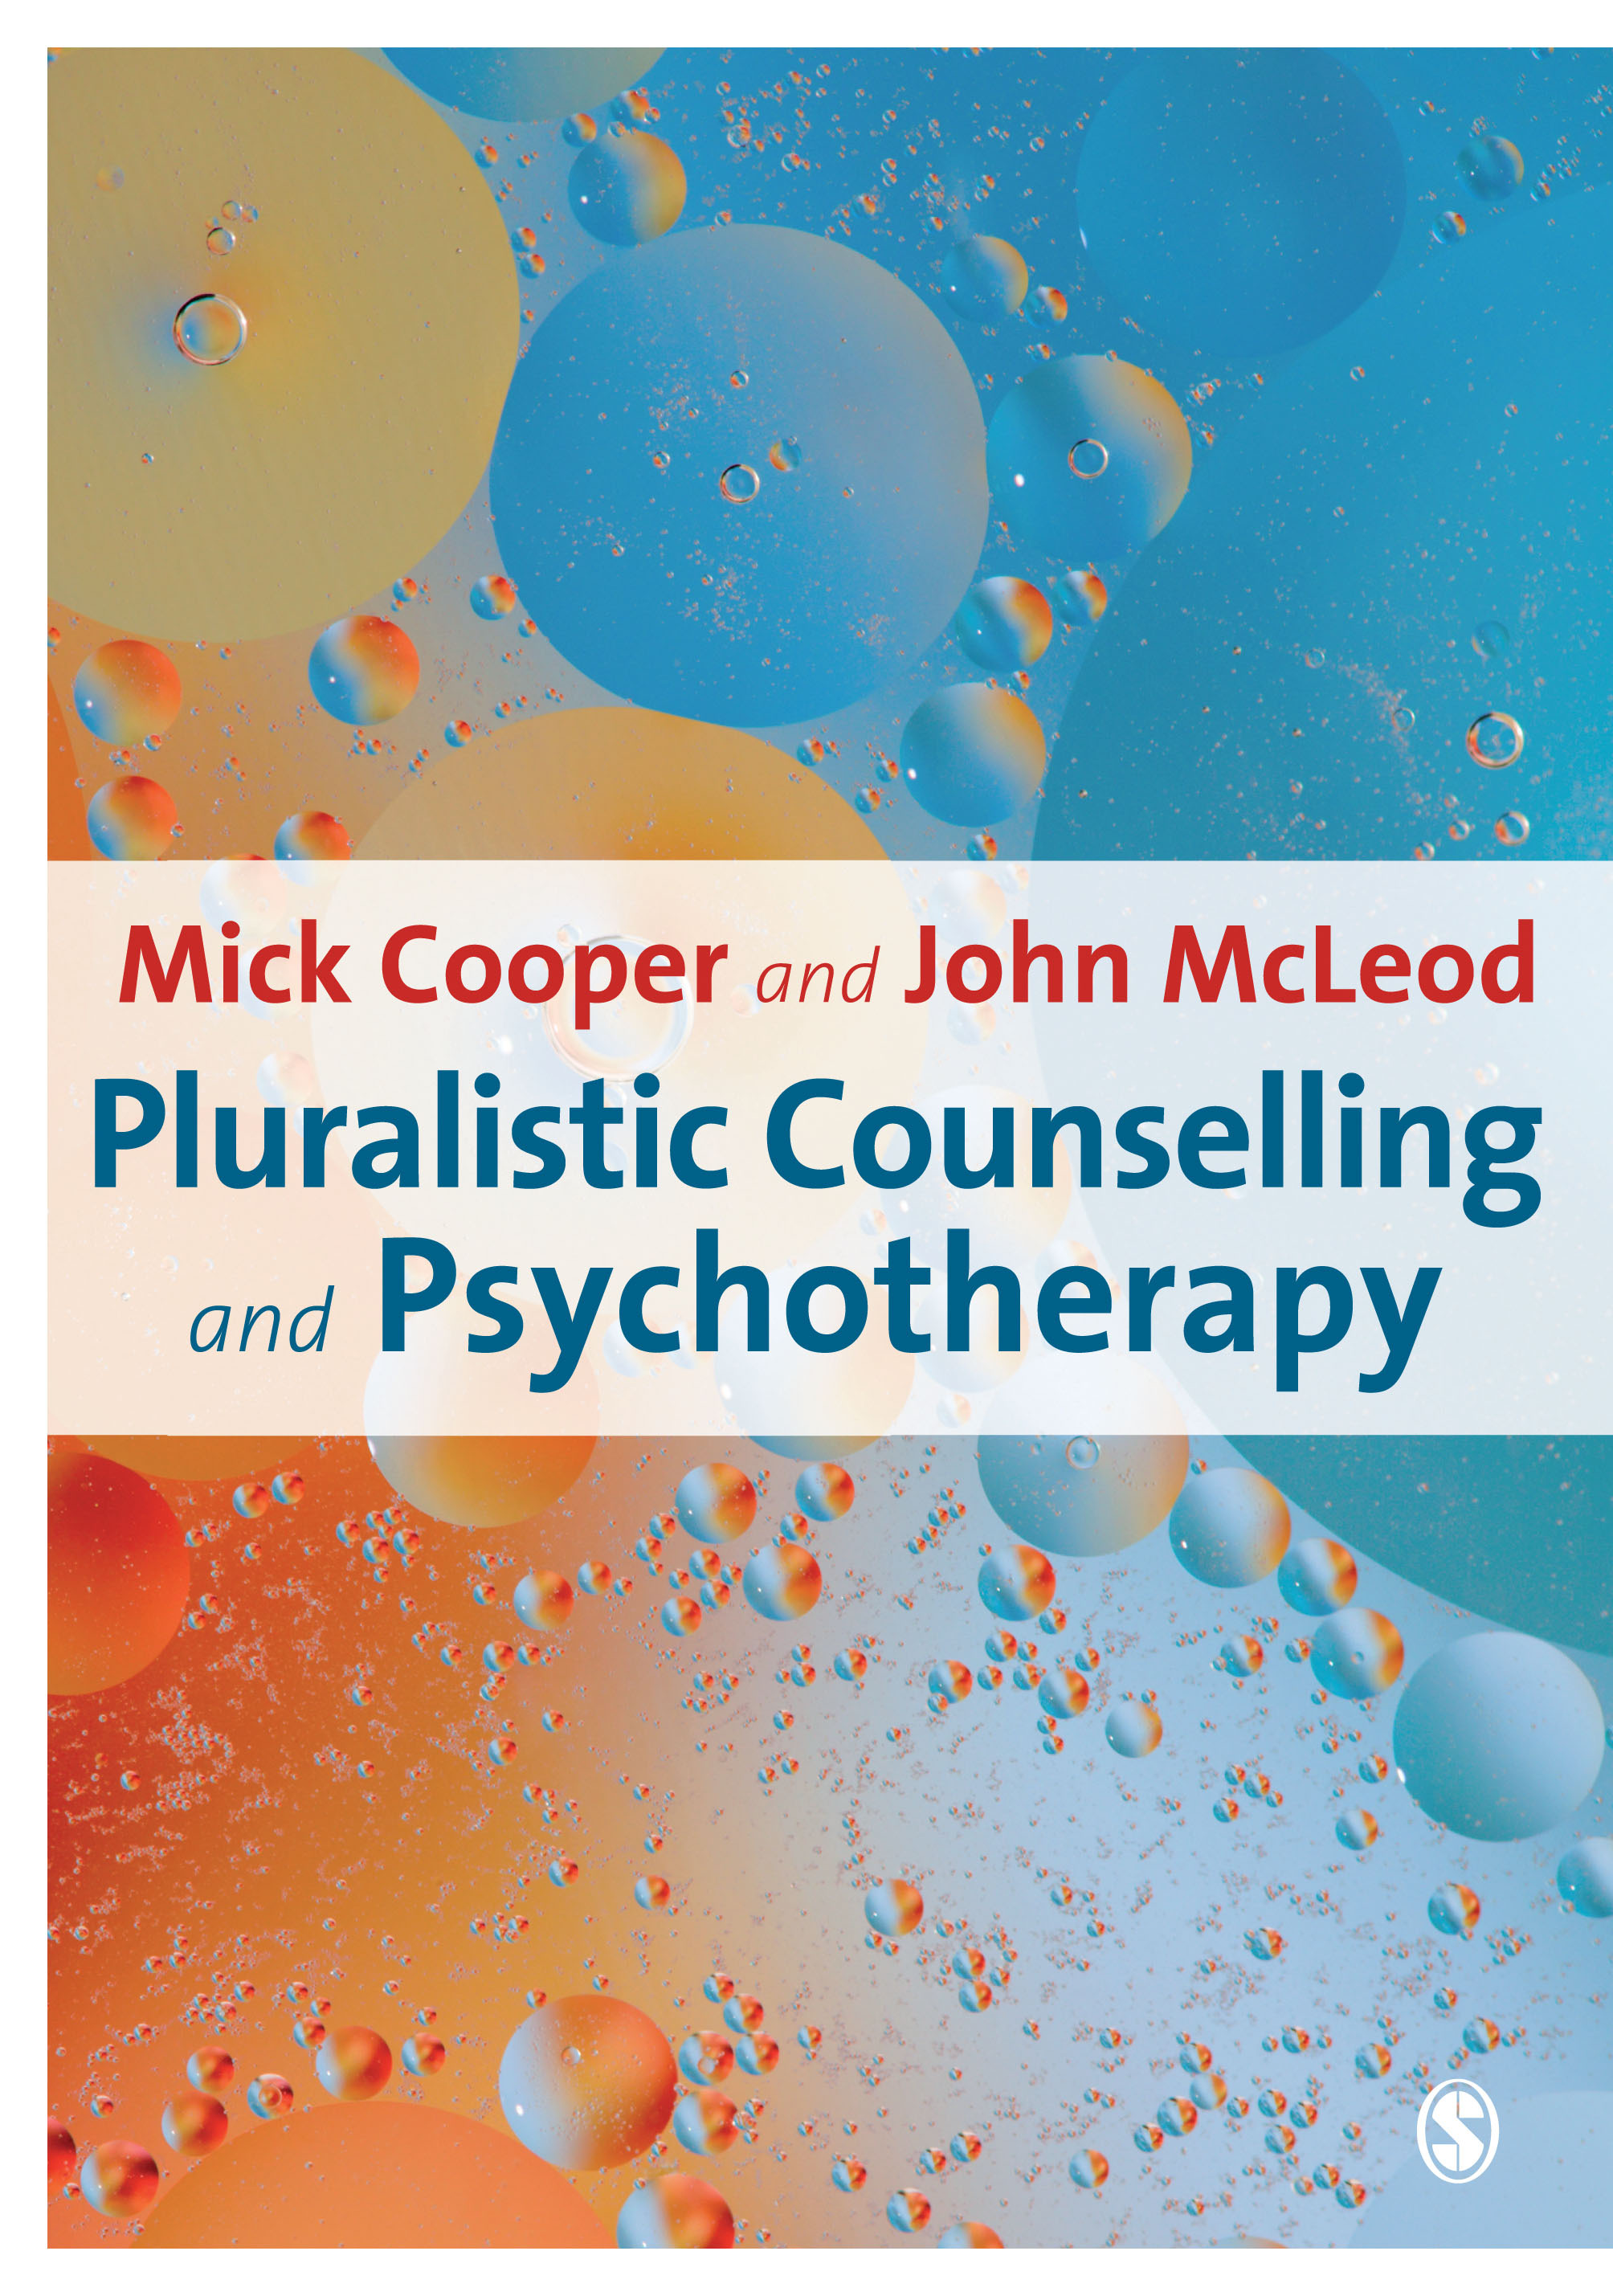 Pluralistic Counselling and Psychotherapy book cover 